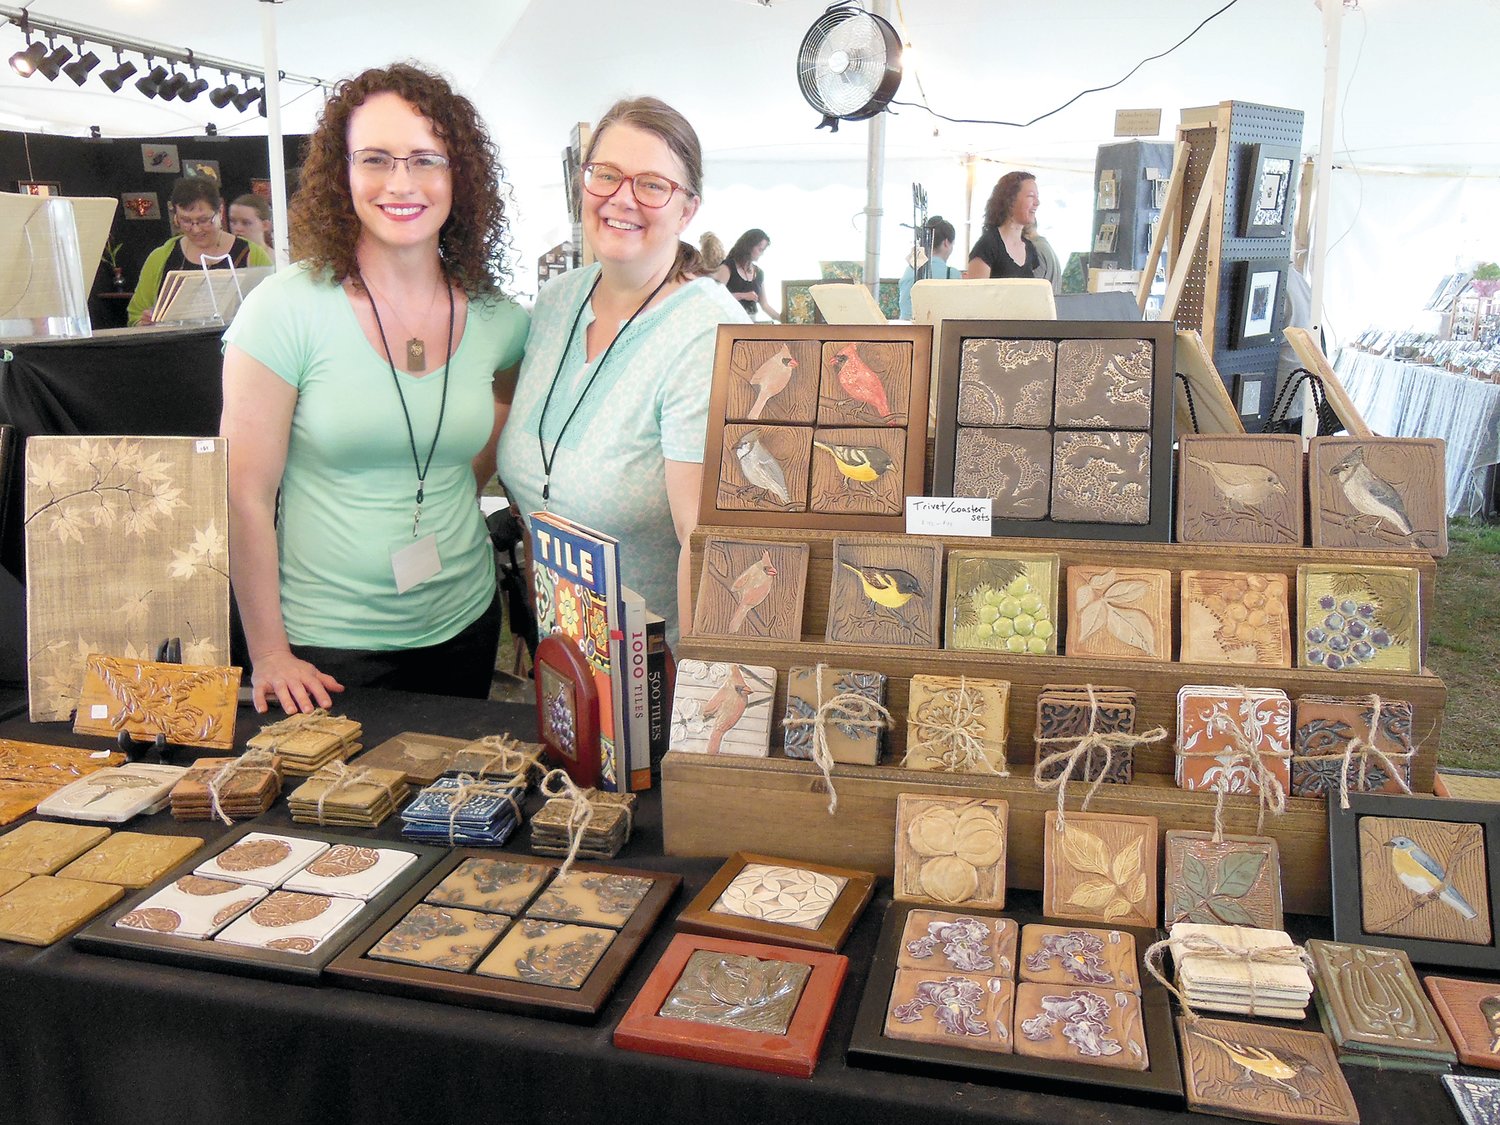 Tile artisan Theresa Mustafa of Boonton, N.J., left, will be among the participants in the 21st annual Tile Festival at the Moravian Pottery and Tile Works in Doylestown.  Admiring Mustafa’s creative work is Jen Stein, also a tile maker, of Ramsey, N.J.